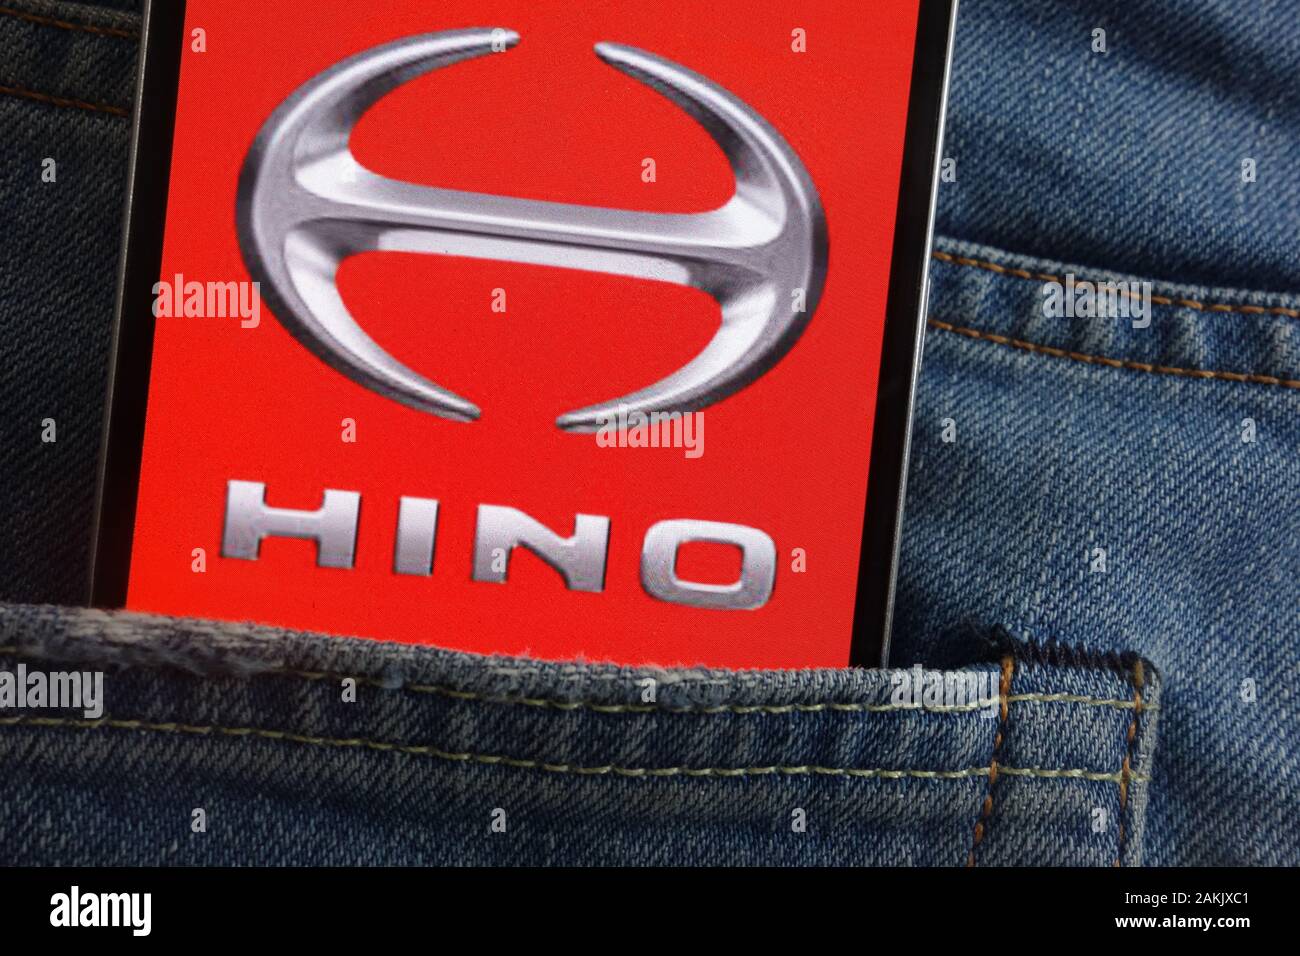 Hino logo displayed on smartphone hidden in jeans pocket Stock Photo